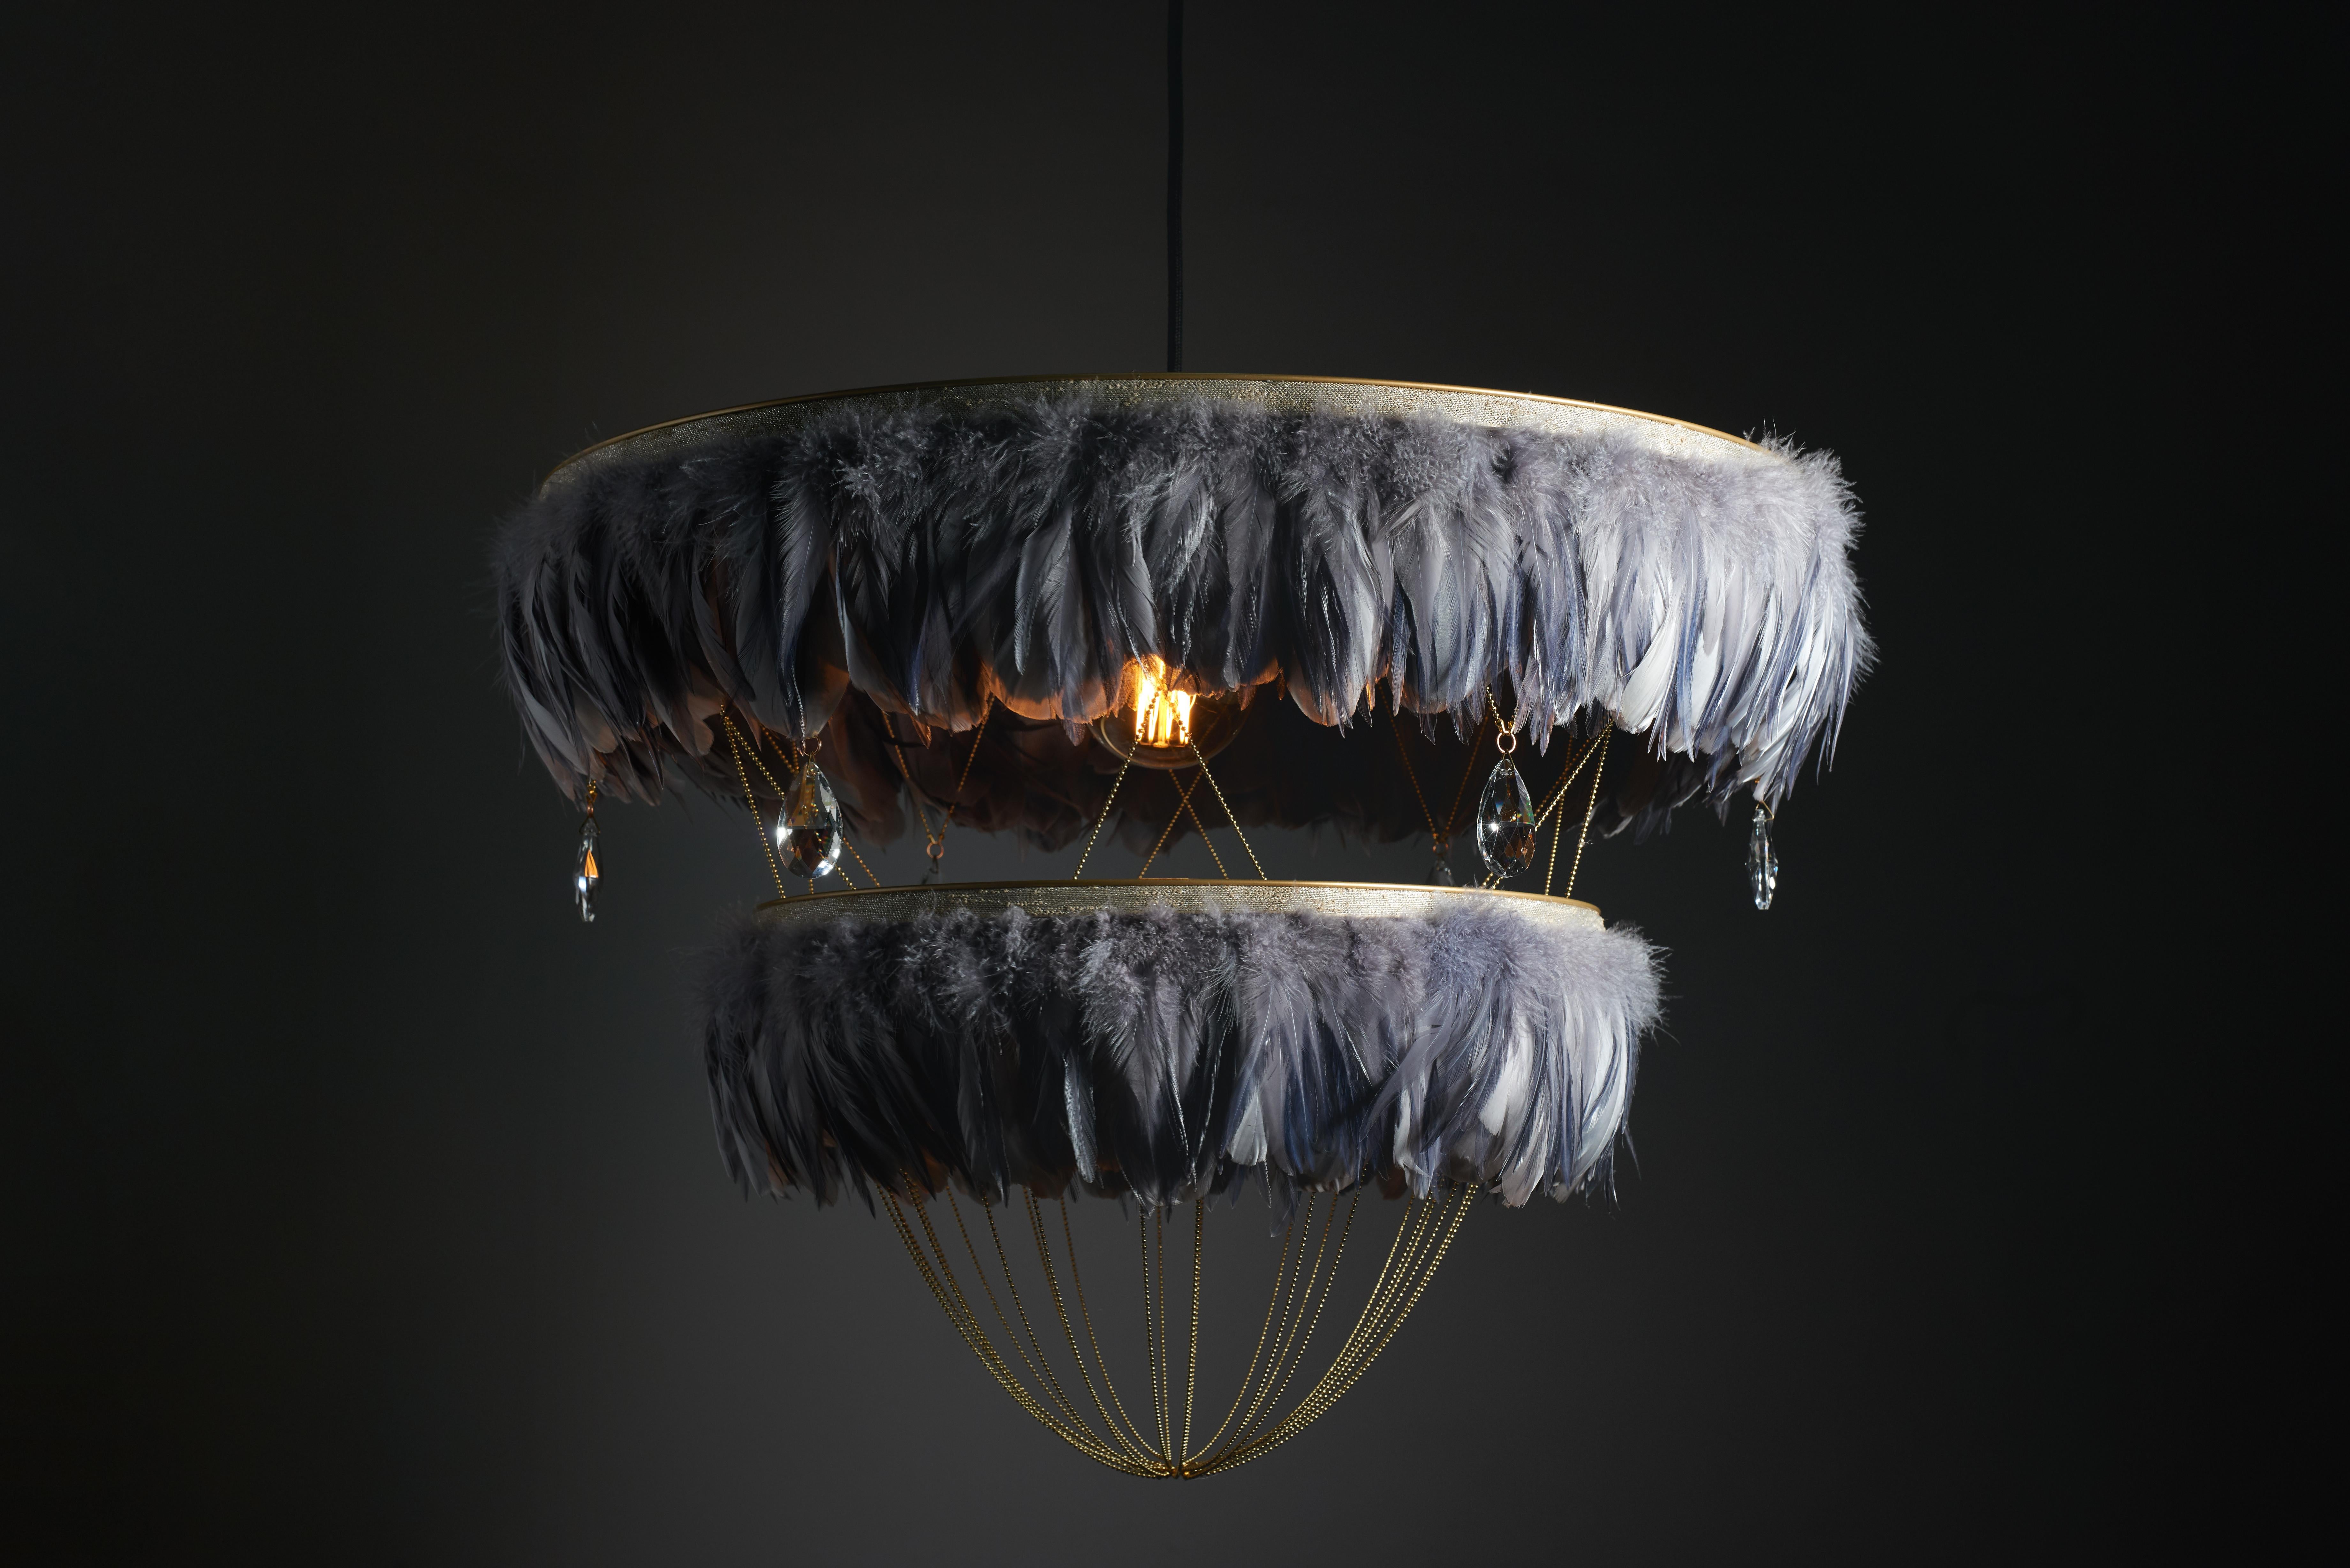 Dyed Feather Chandelier in Two Tone Grey - Bertie -  Hand Made to order in London.  For Sale